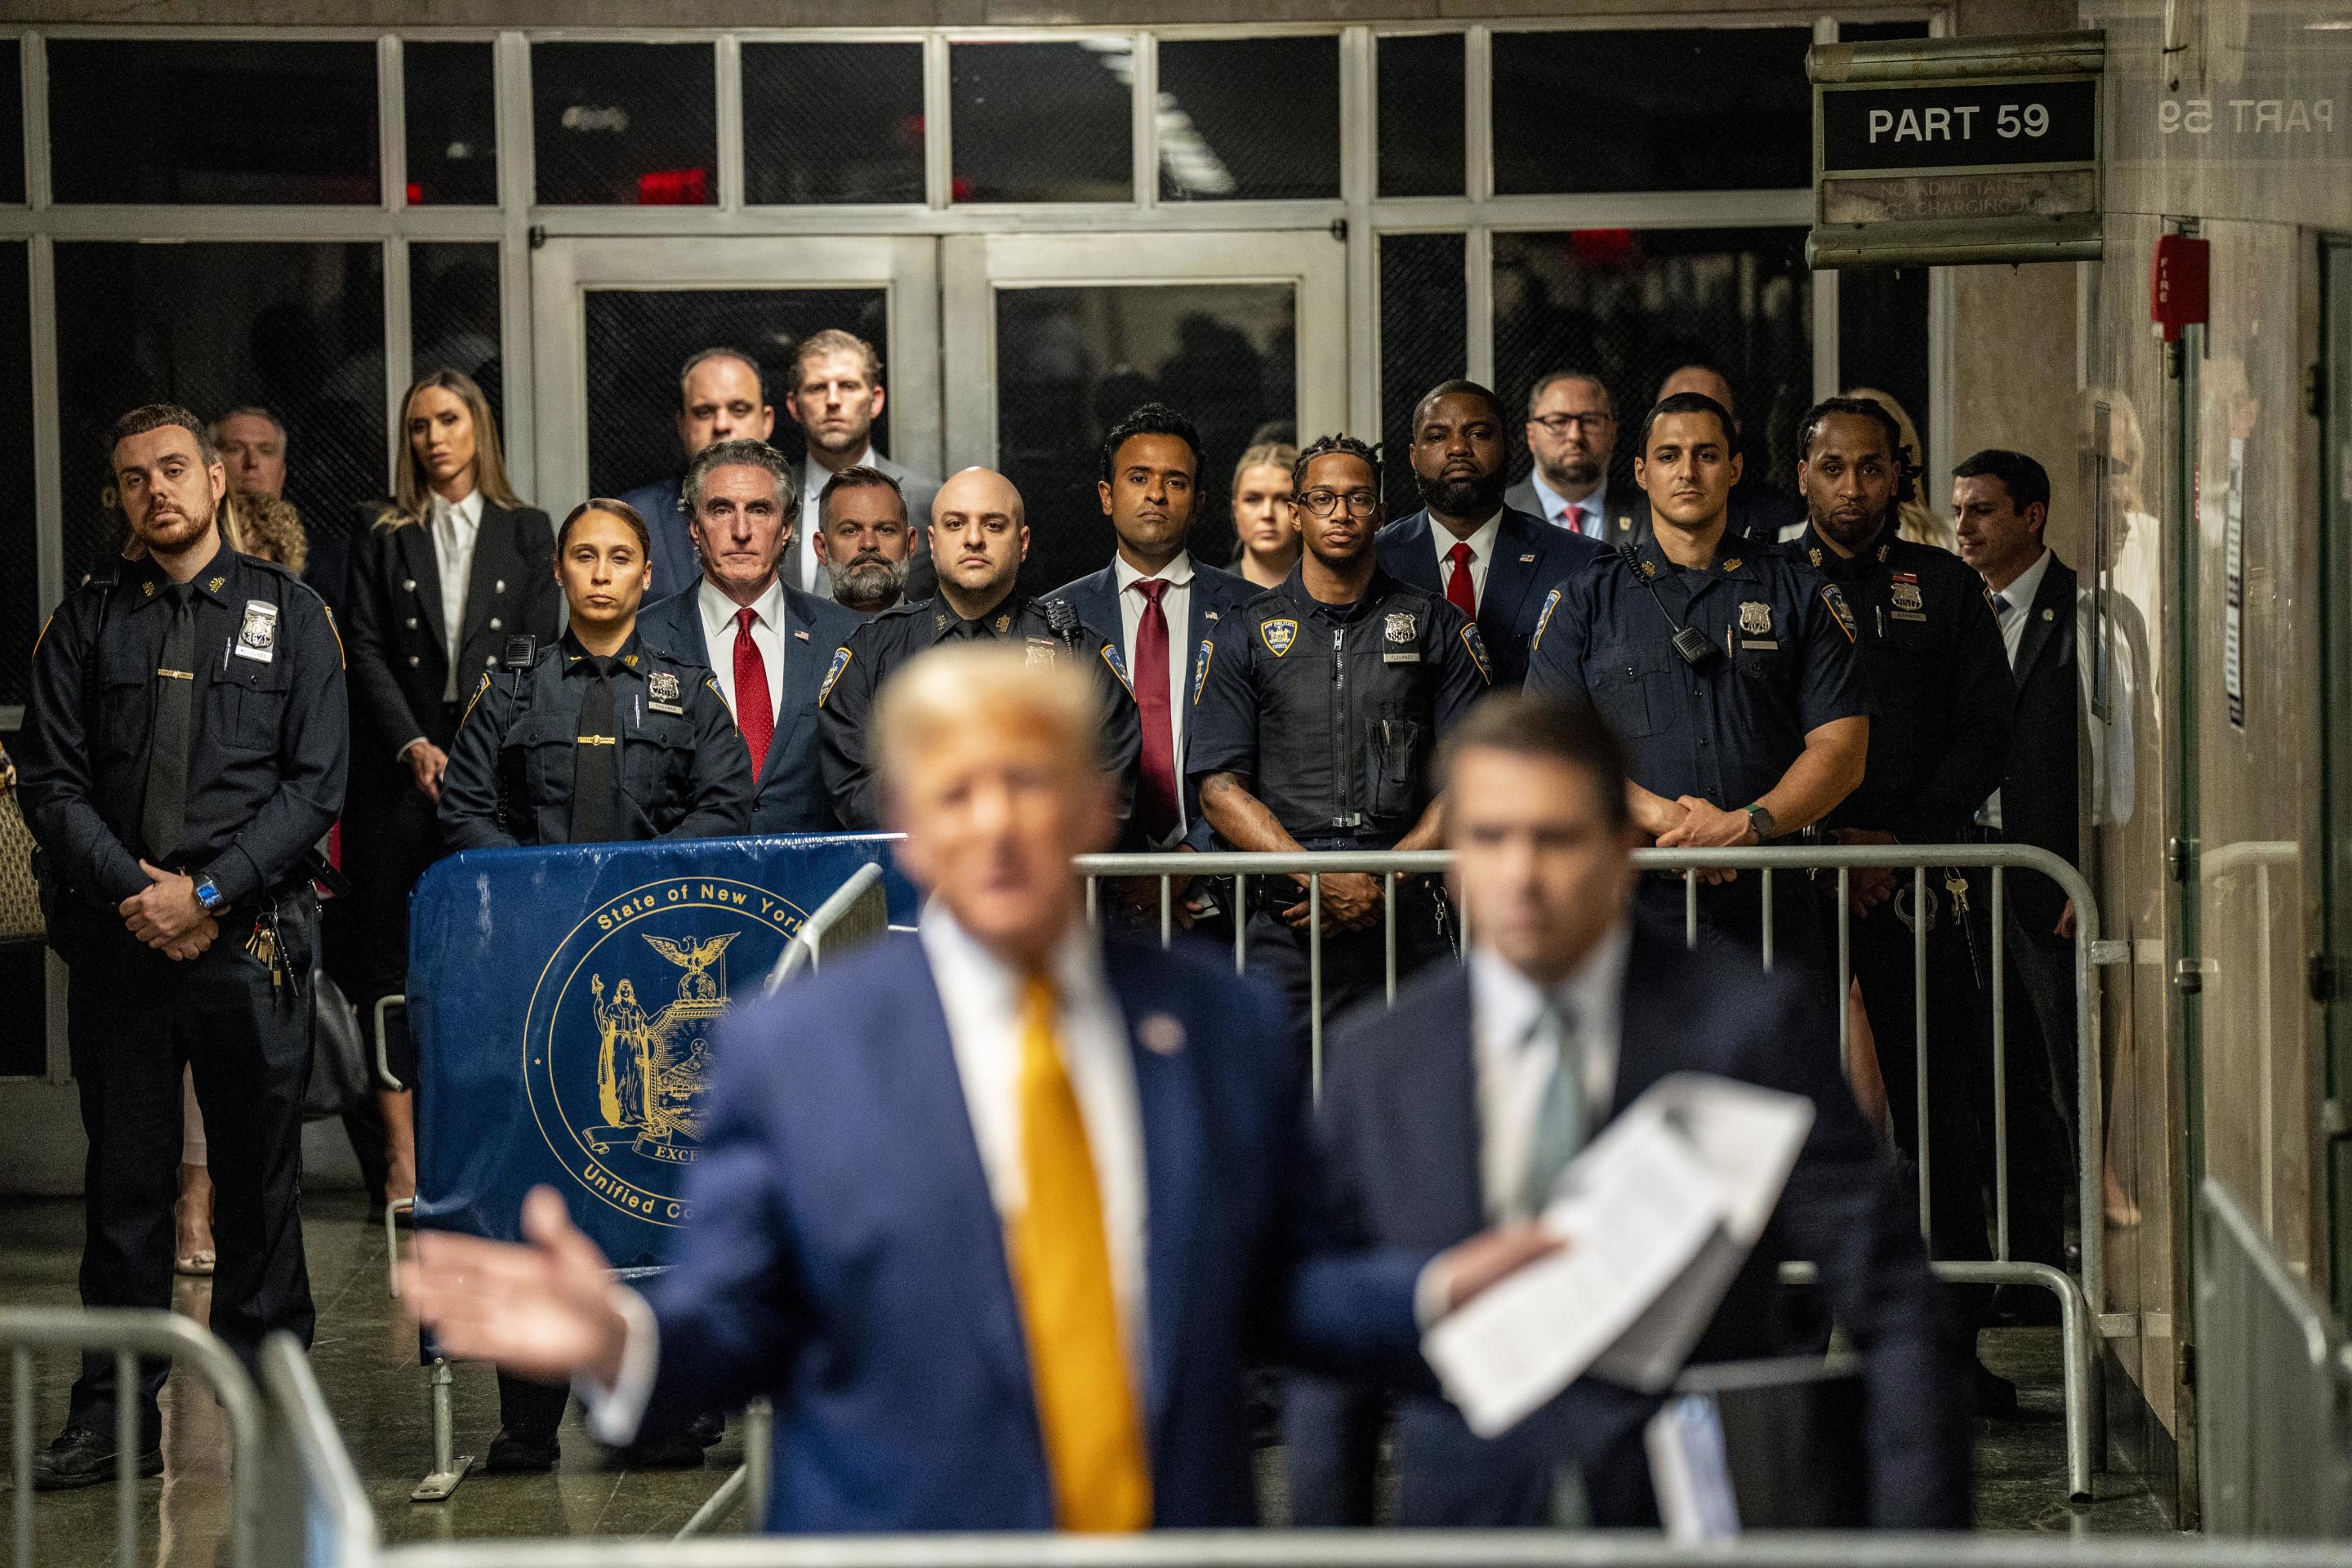 Trump supporters watch as he speaks to reporters inside the Manhattan Criminal Courthouse.